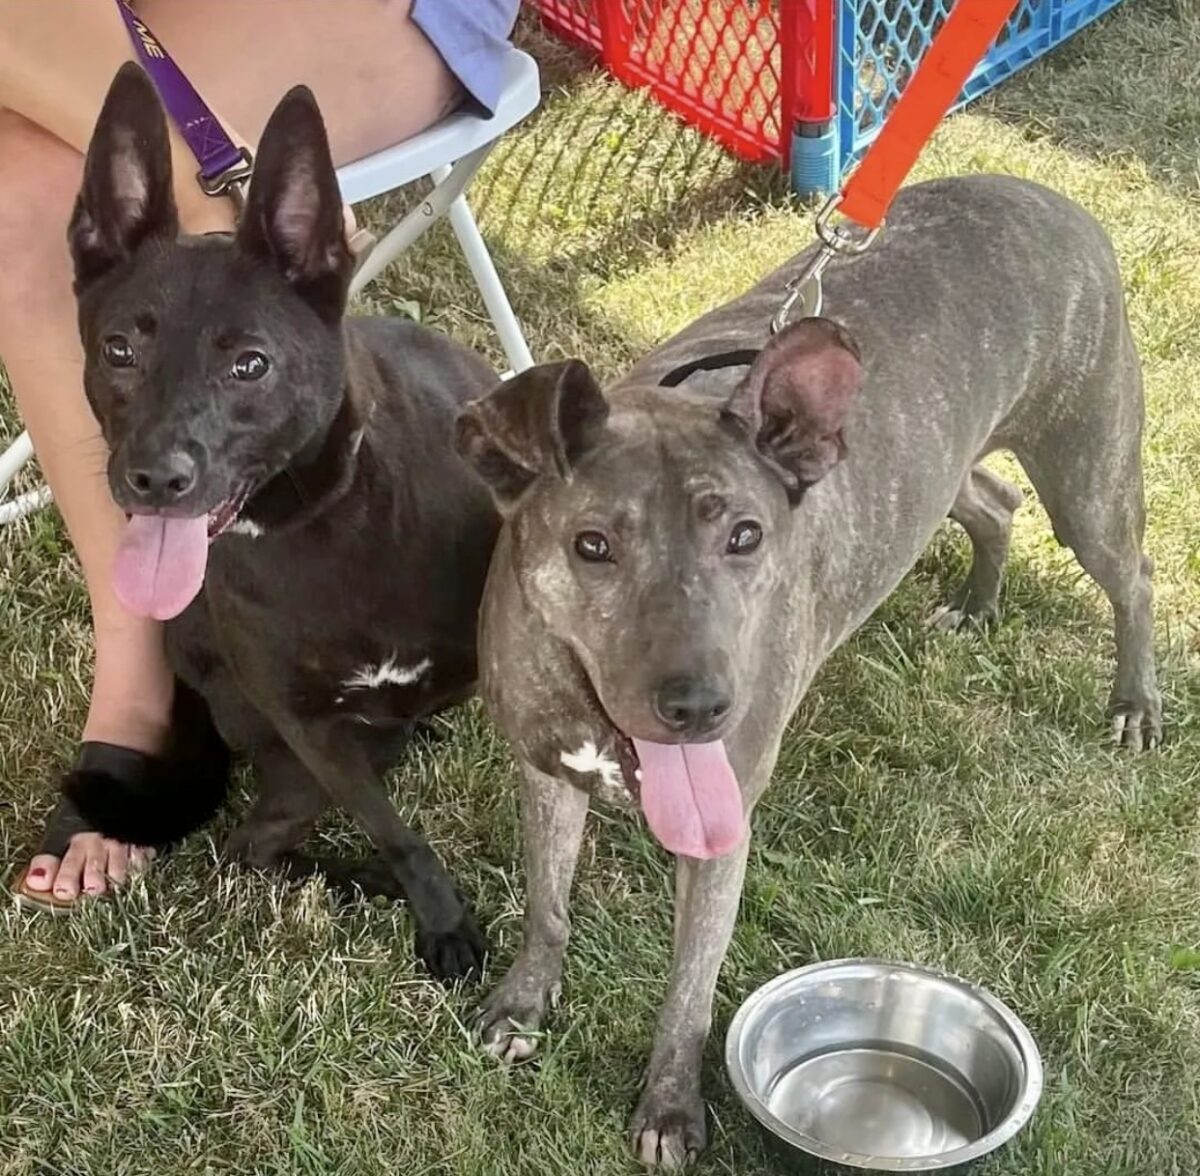 Echo and Inky are looking for a home and will be the first tell you that adopting instead of buying from a breeder helps combat overpopulation. They must be sweeties because they’re our dog Major's siblings. Available at Tylers Rescue Inc. in Sag Harbor. TYLERS RESCUE INC.